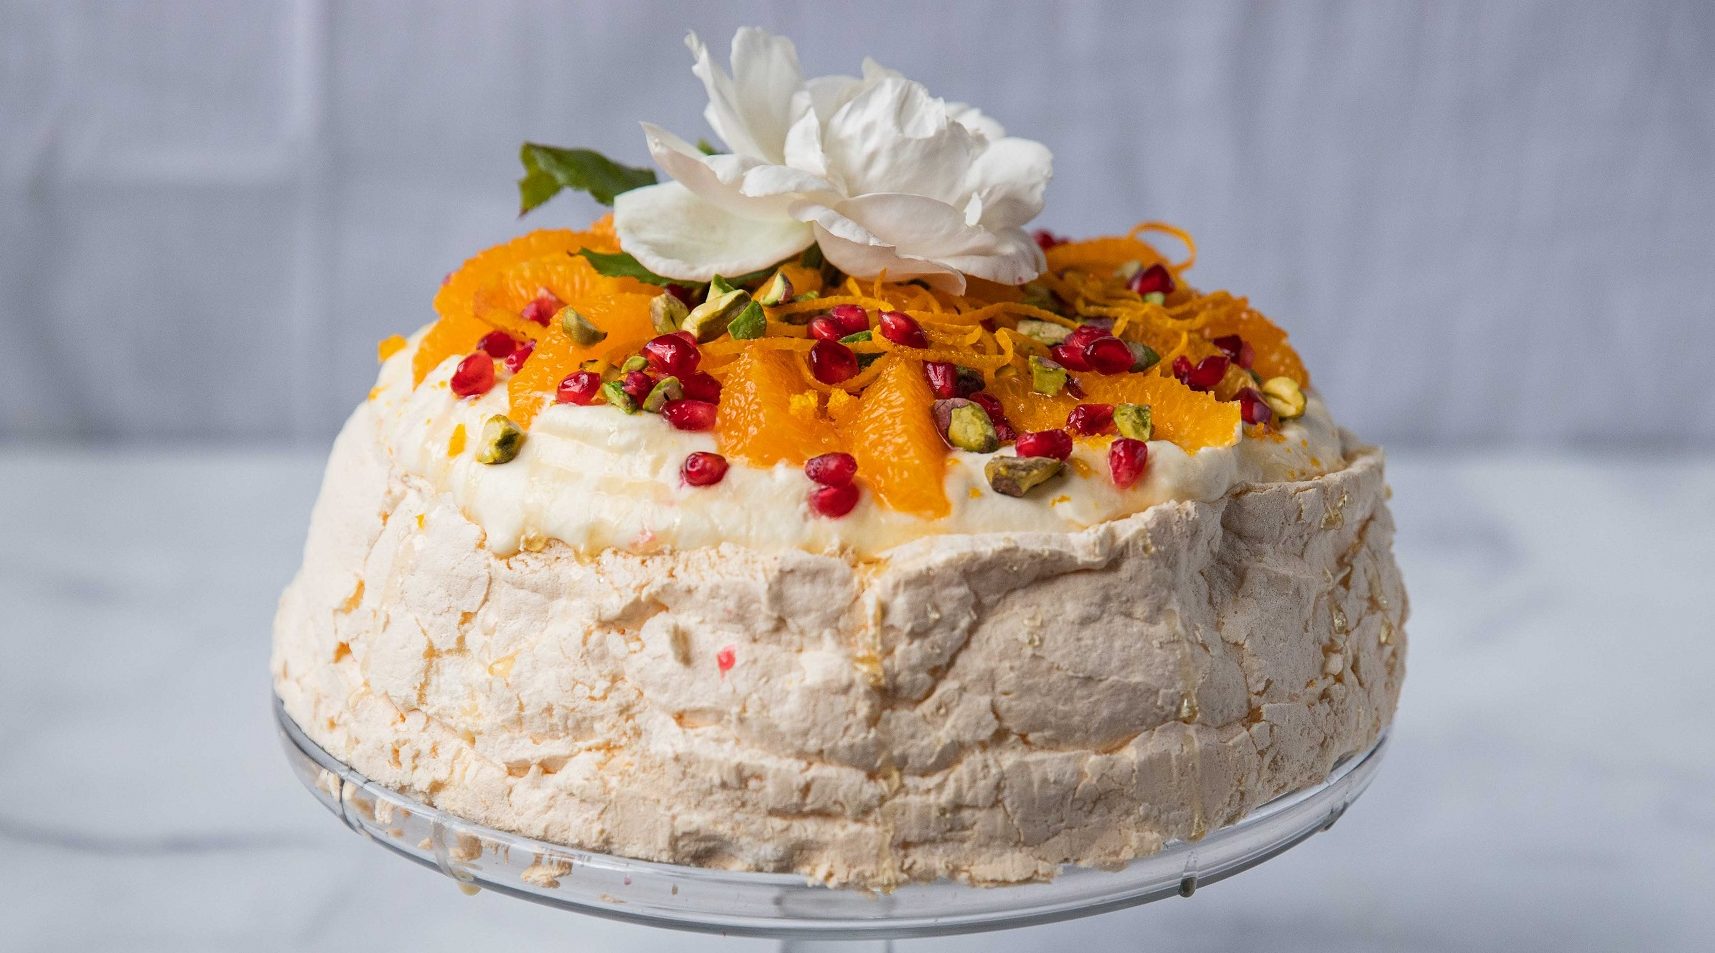 orange and red fruit pavlova with a white rose on top on a glass cake stand